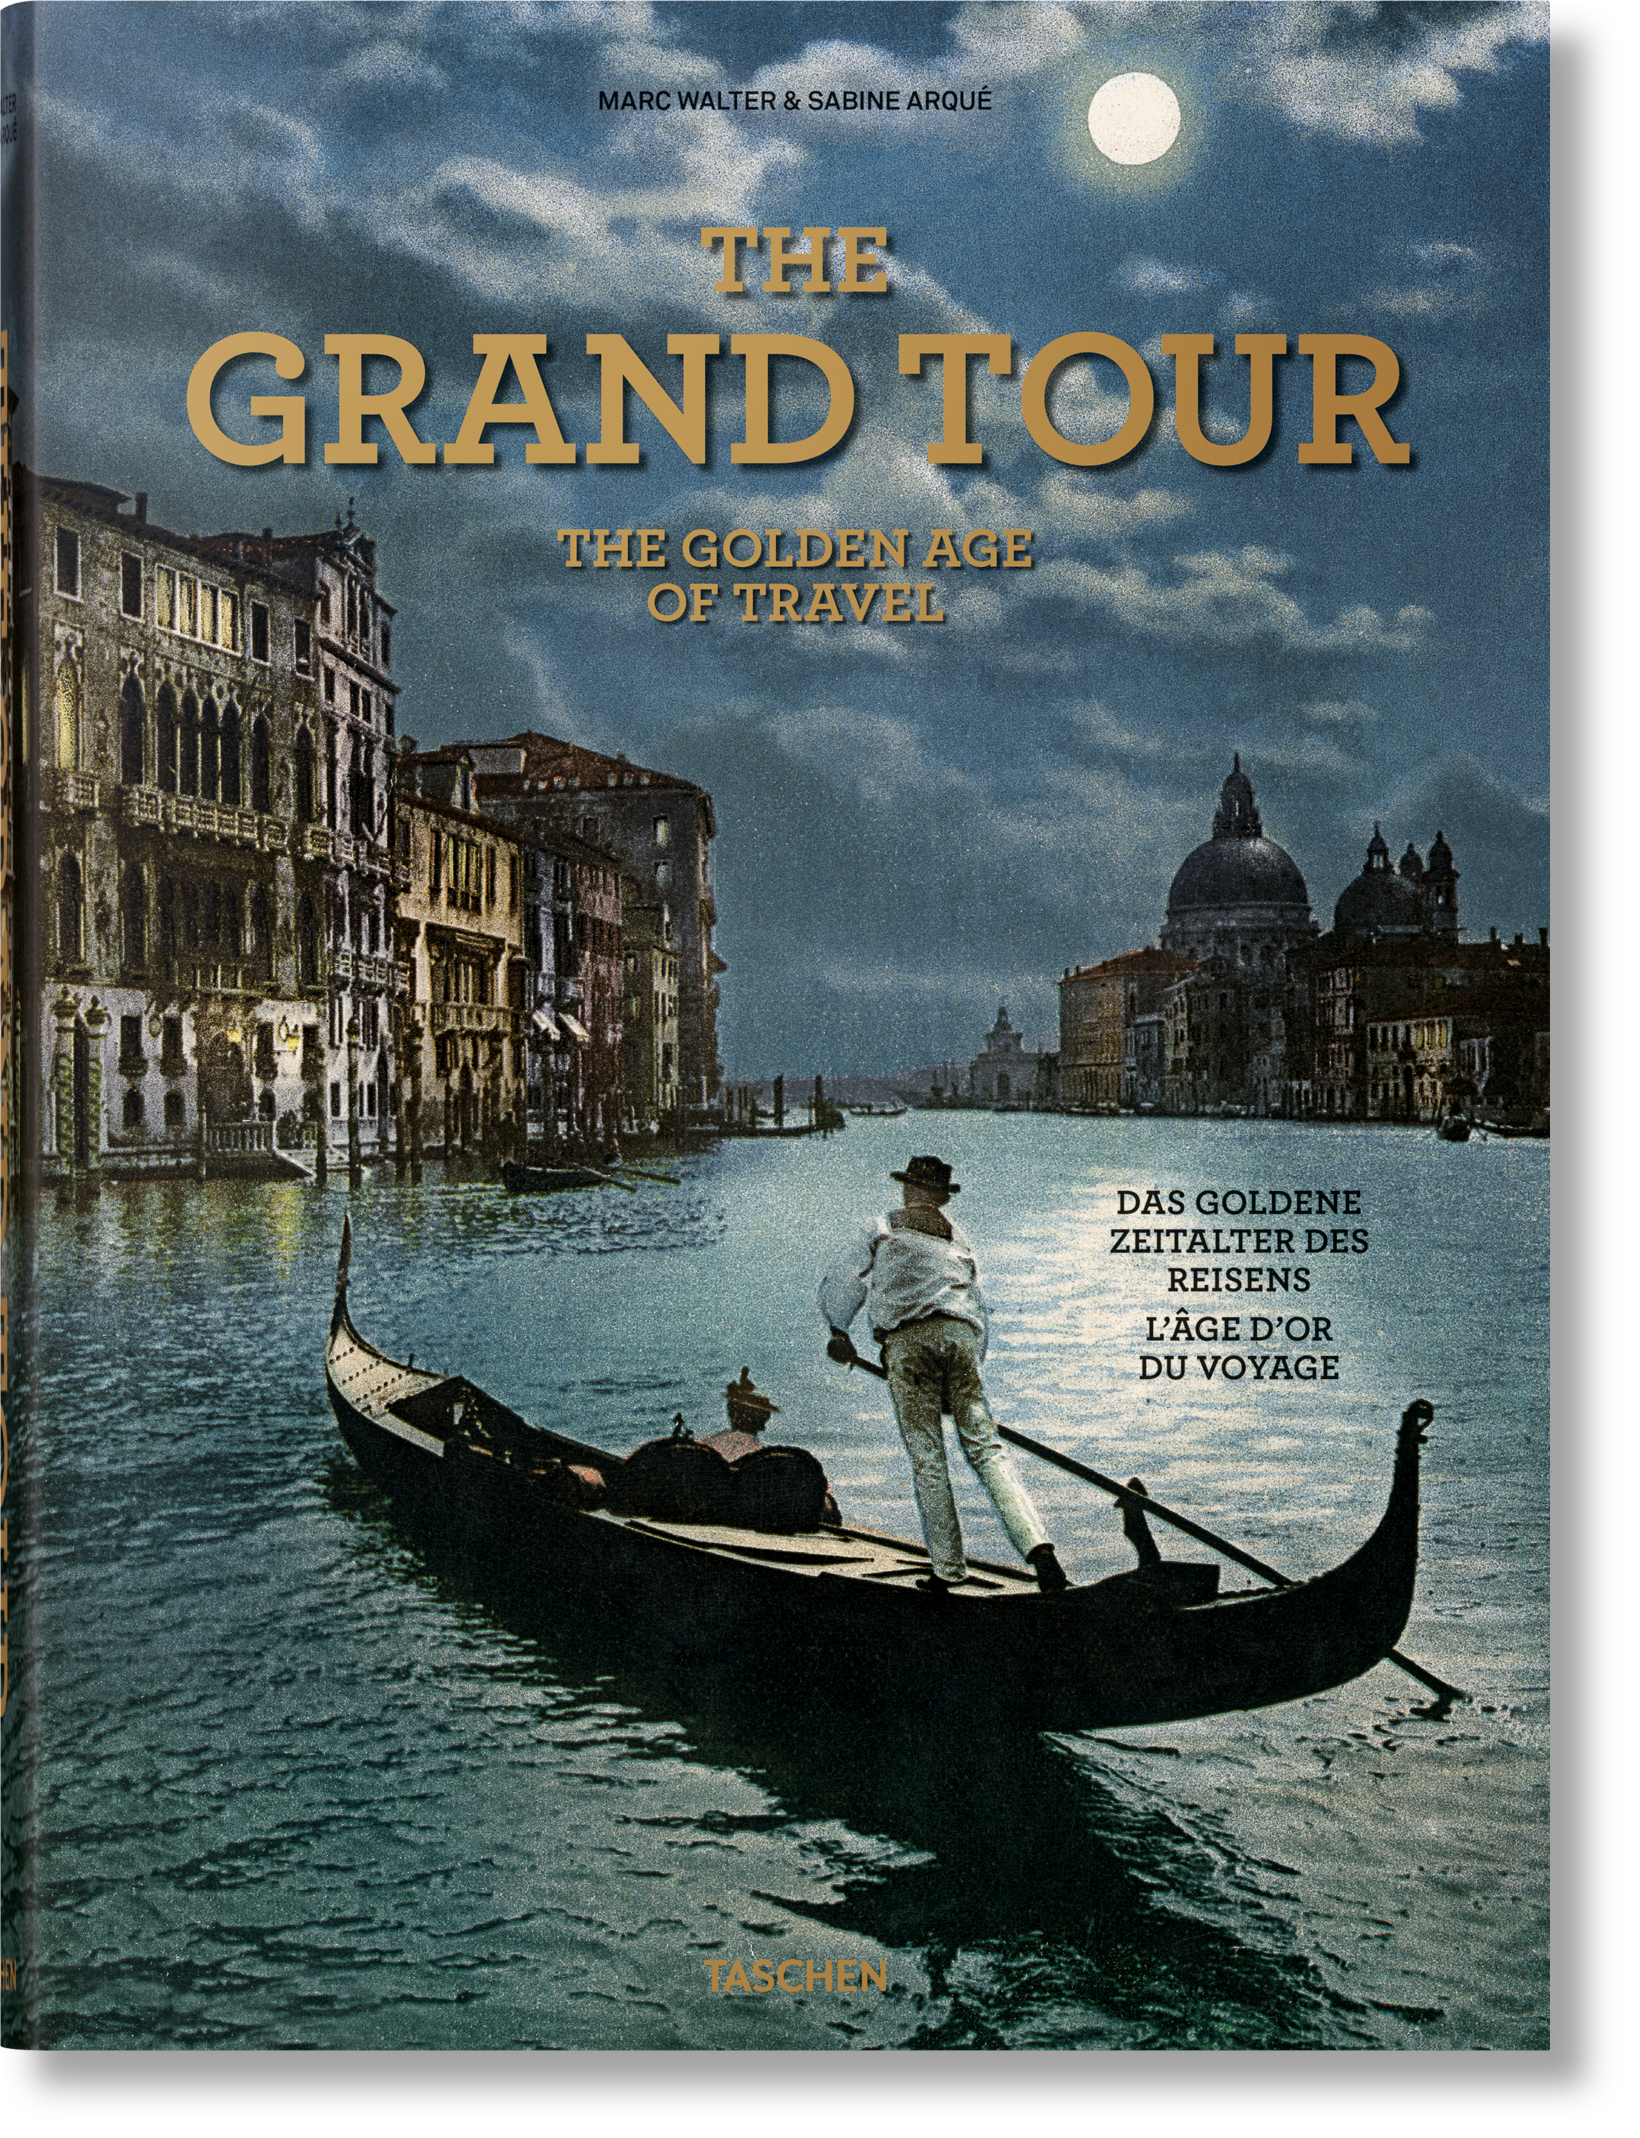 History of the Grand Tour – The Educated Traveller